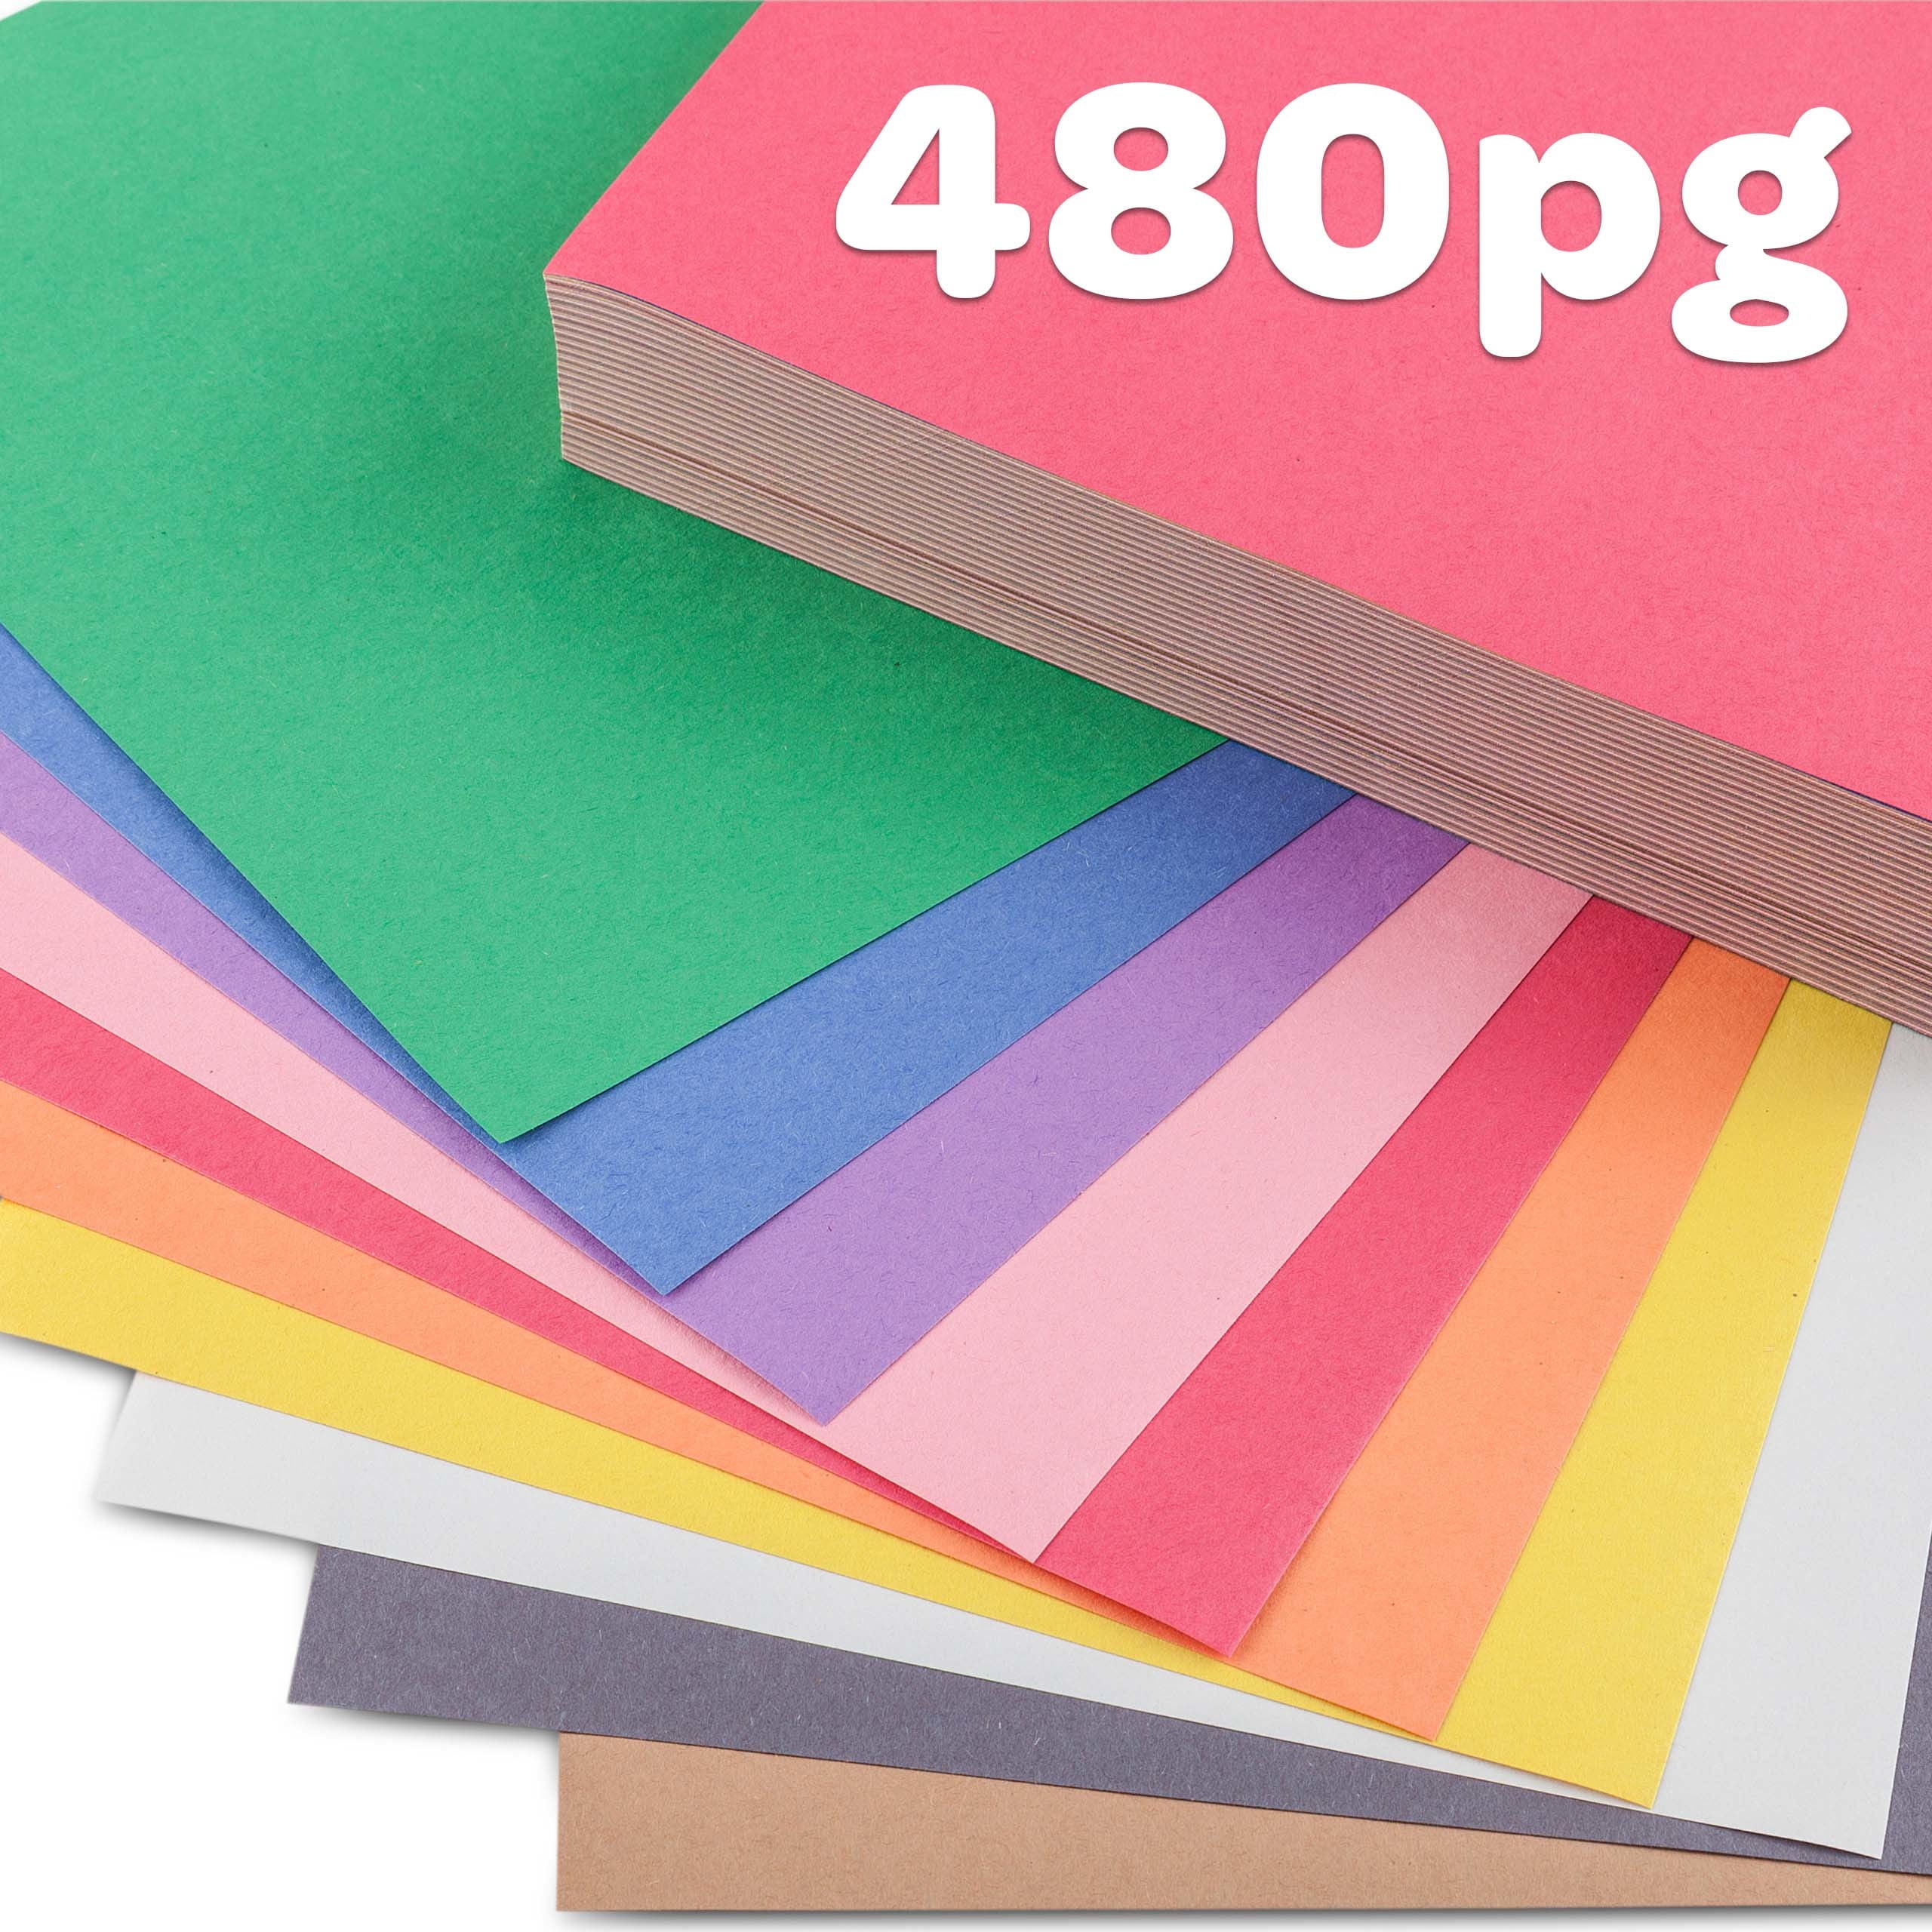 Crayola Construction Paper - 9 x 12, 10 Assorted Colors, 240 Sheets